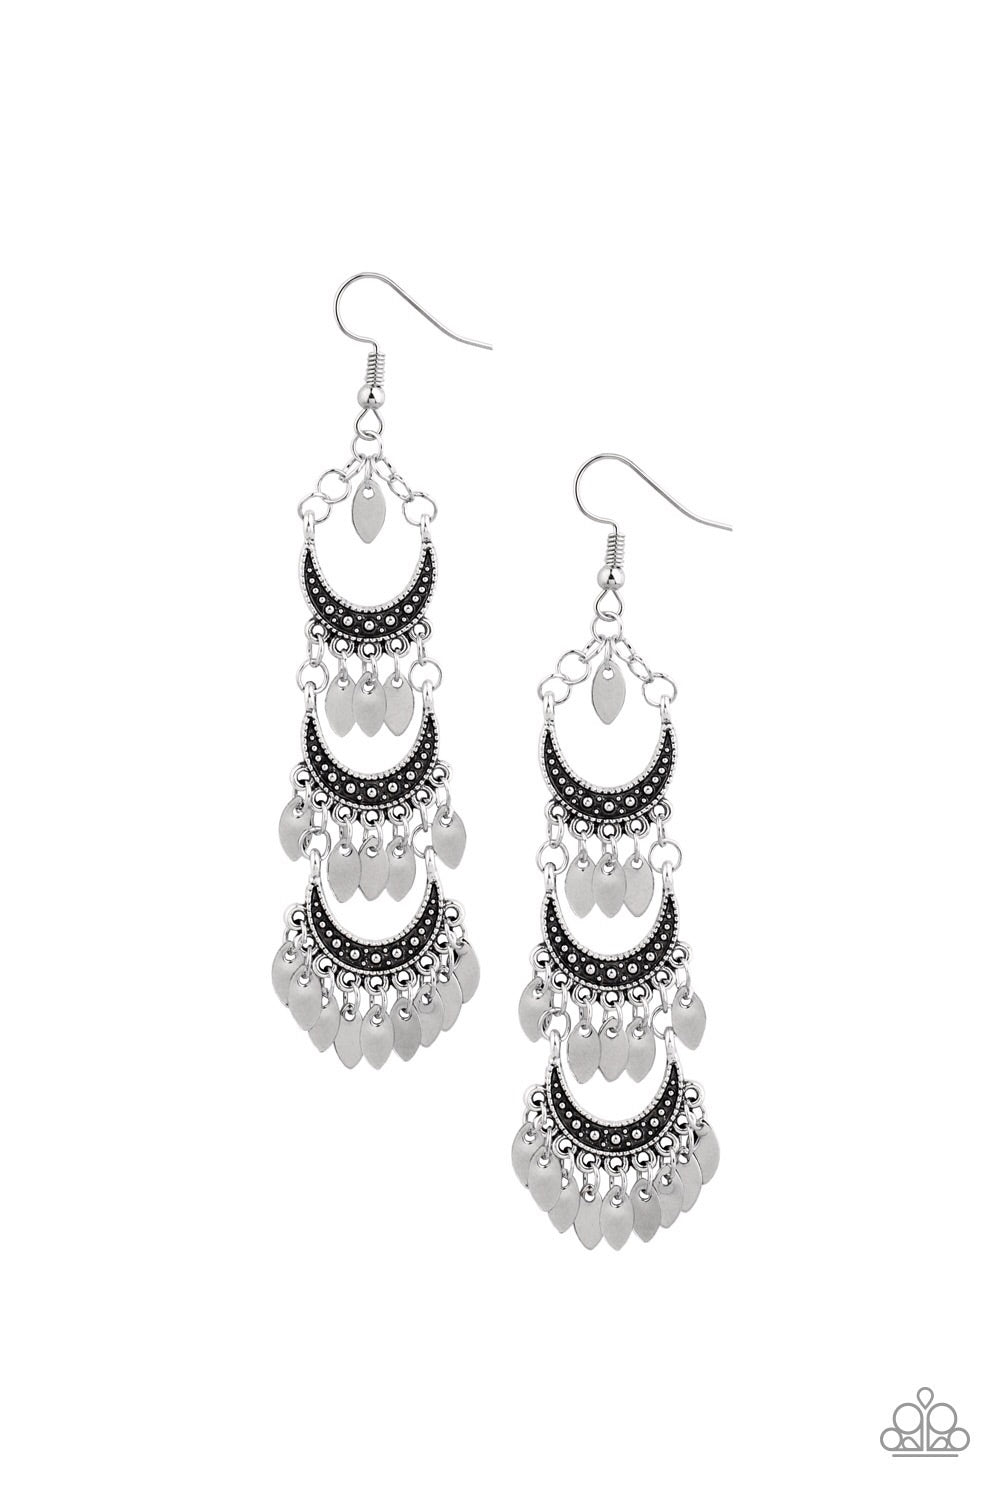 Take Your Chime - Silver Fringe Earrings - Paparazzi Accessories